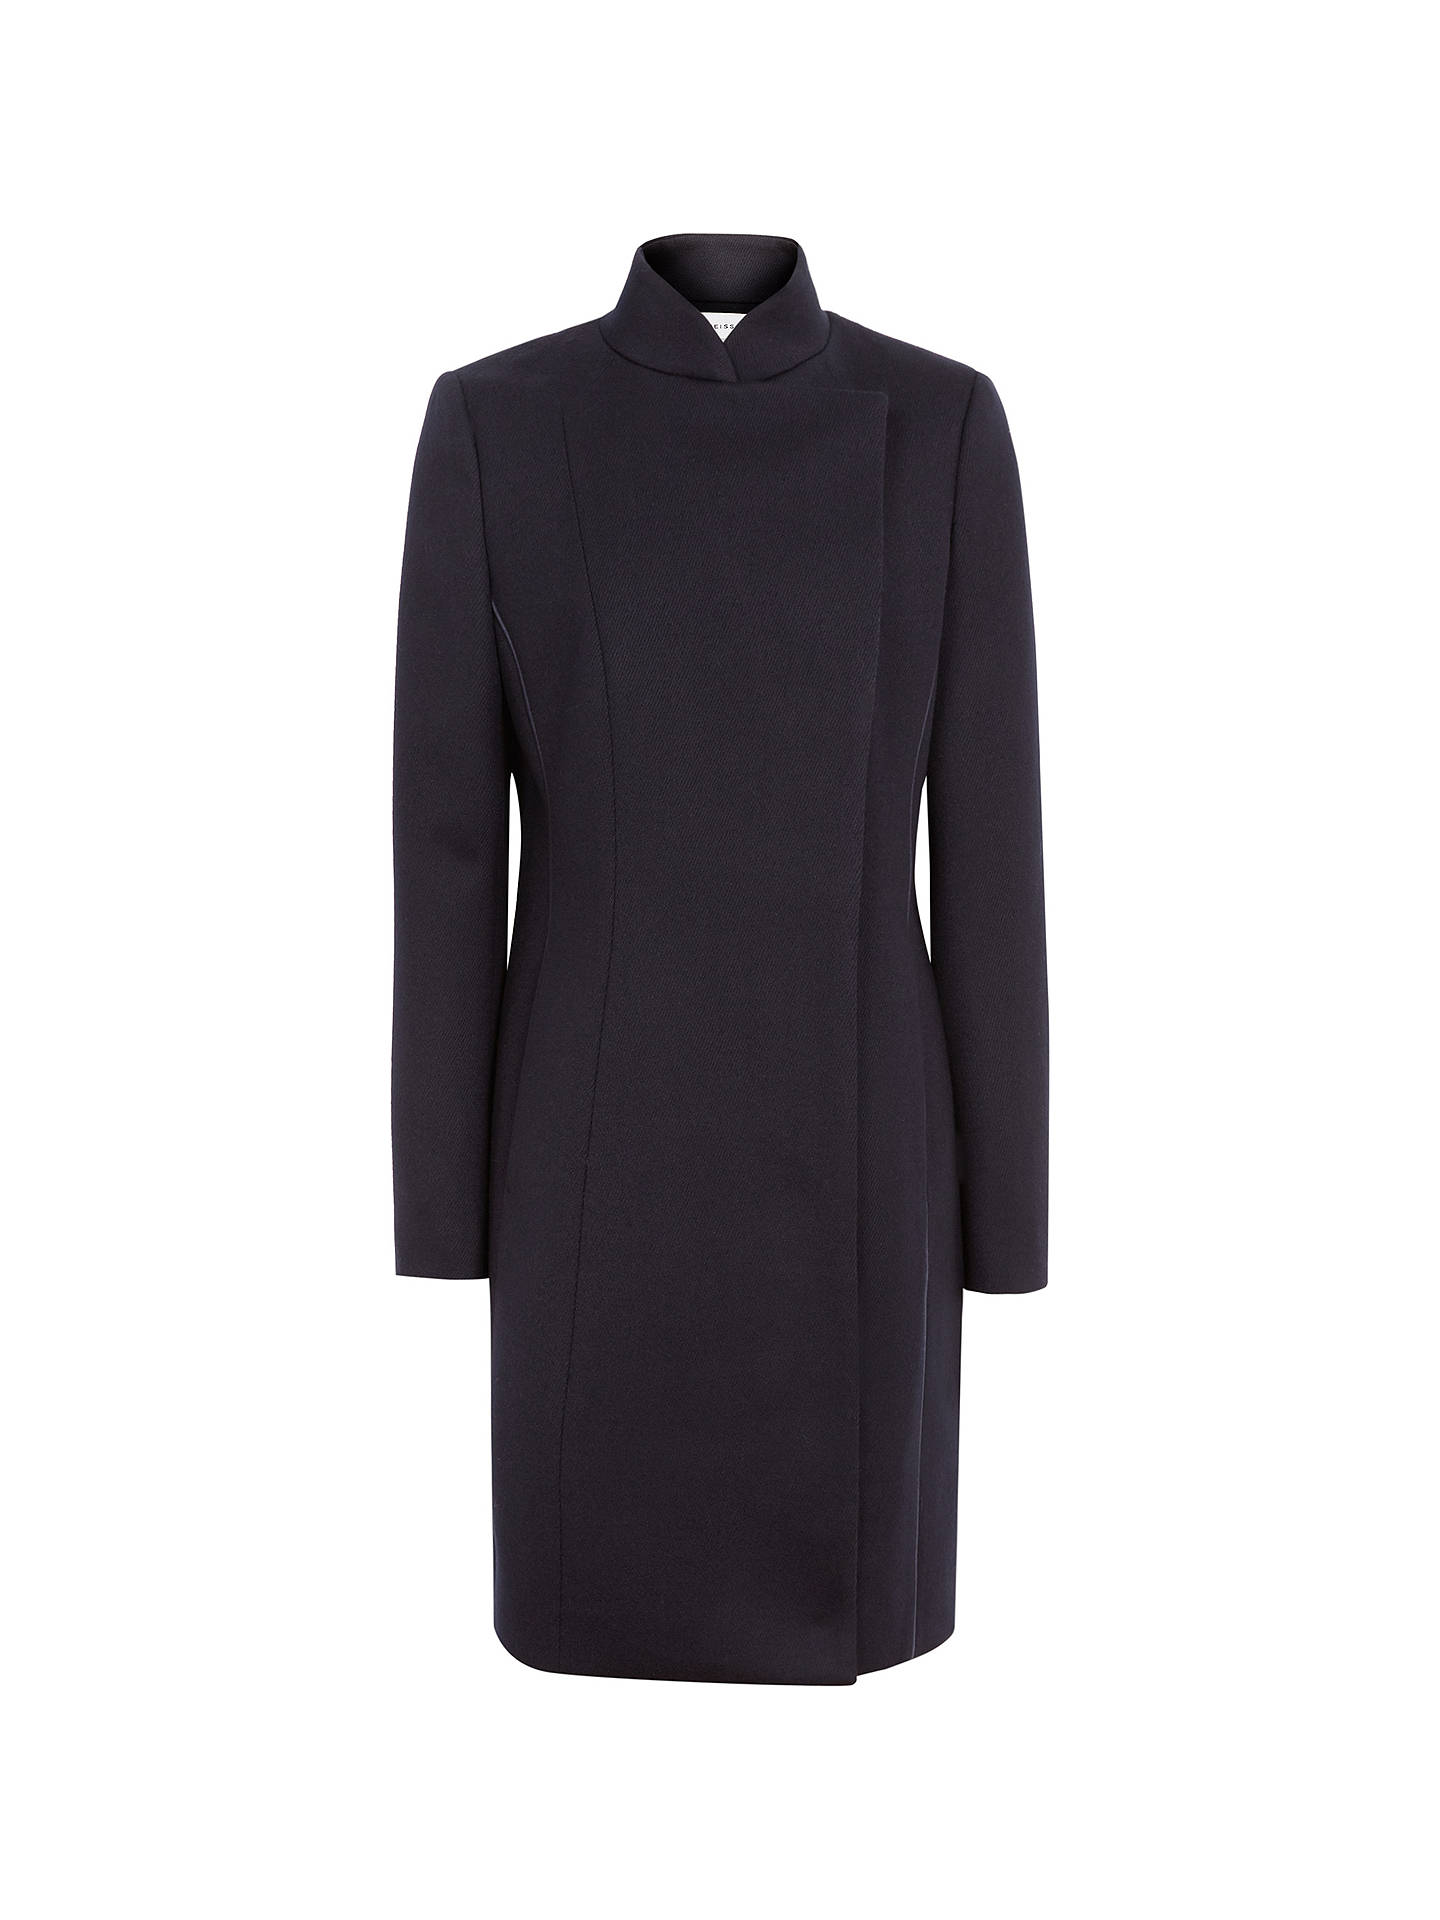 Reiss Lacey Belted Longline Wool Coat, Night Navy at John Lewis & Partners